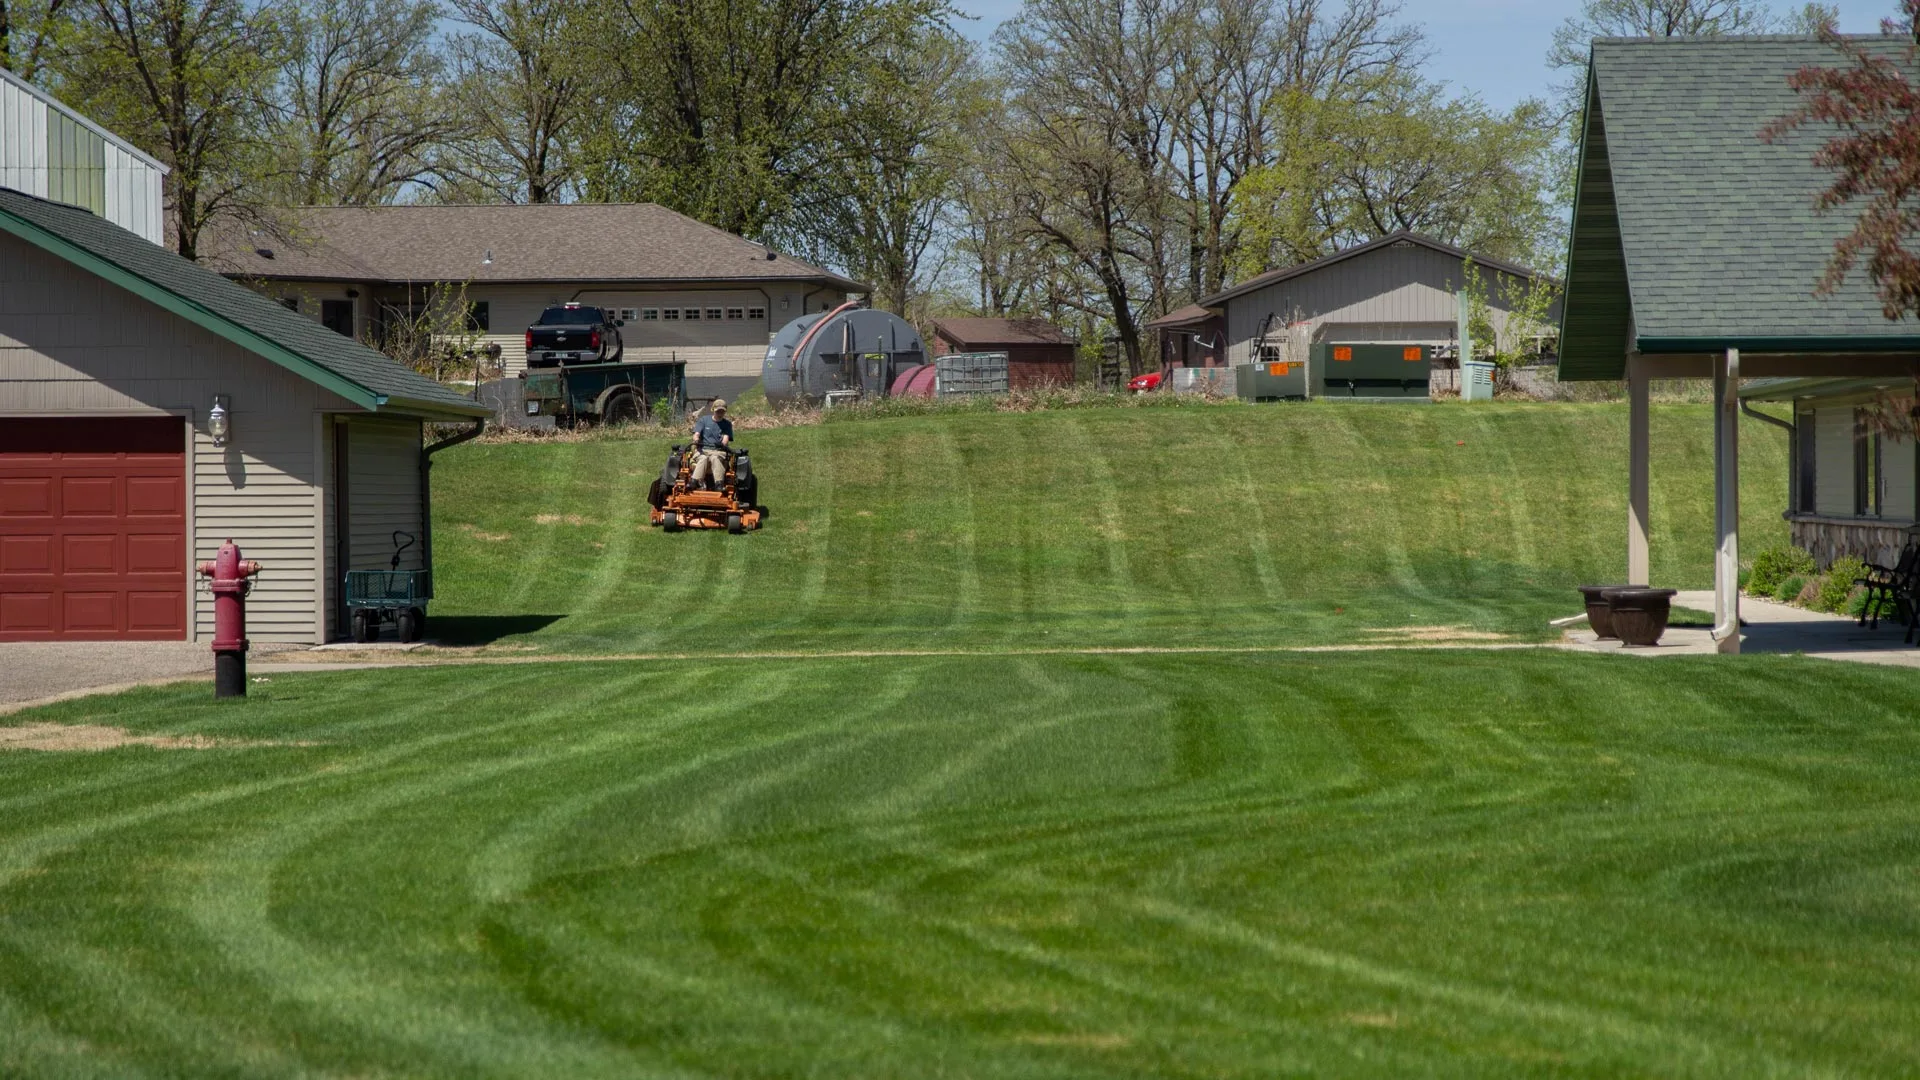 Our team member mowing a residential lawn in Shoreham, MN.